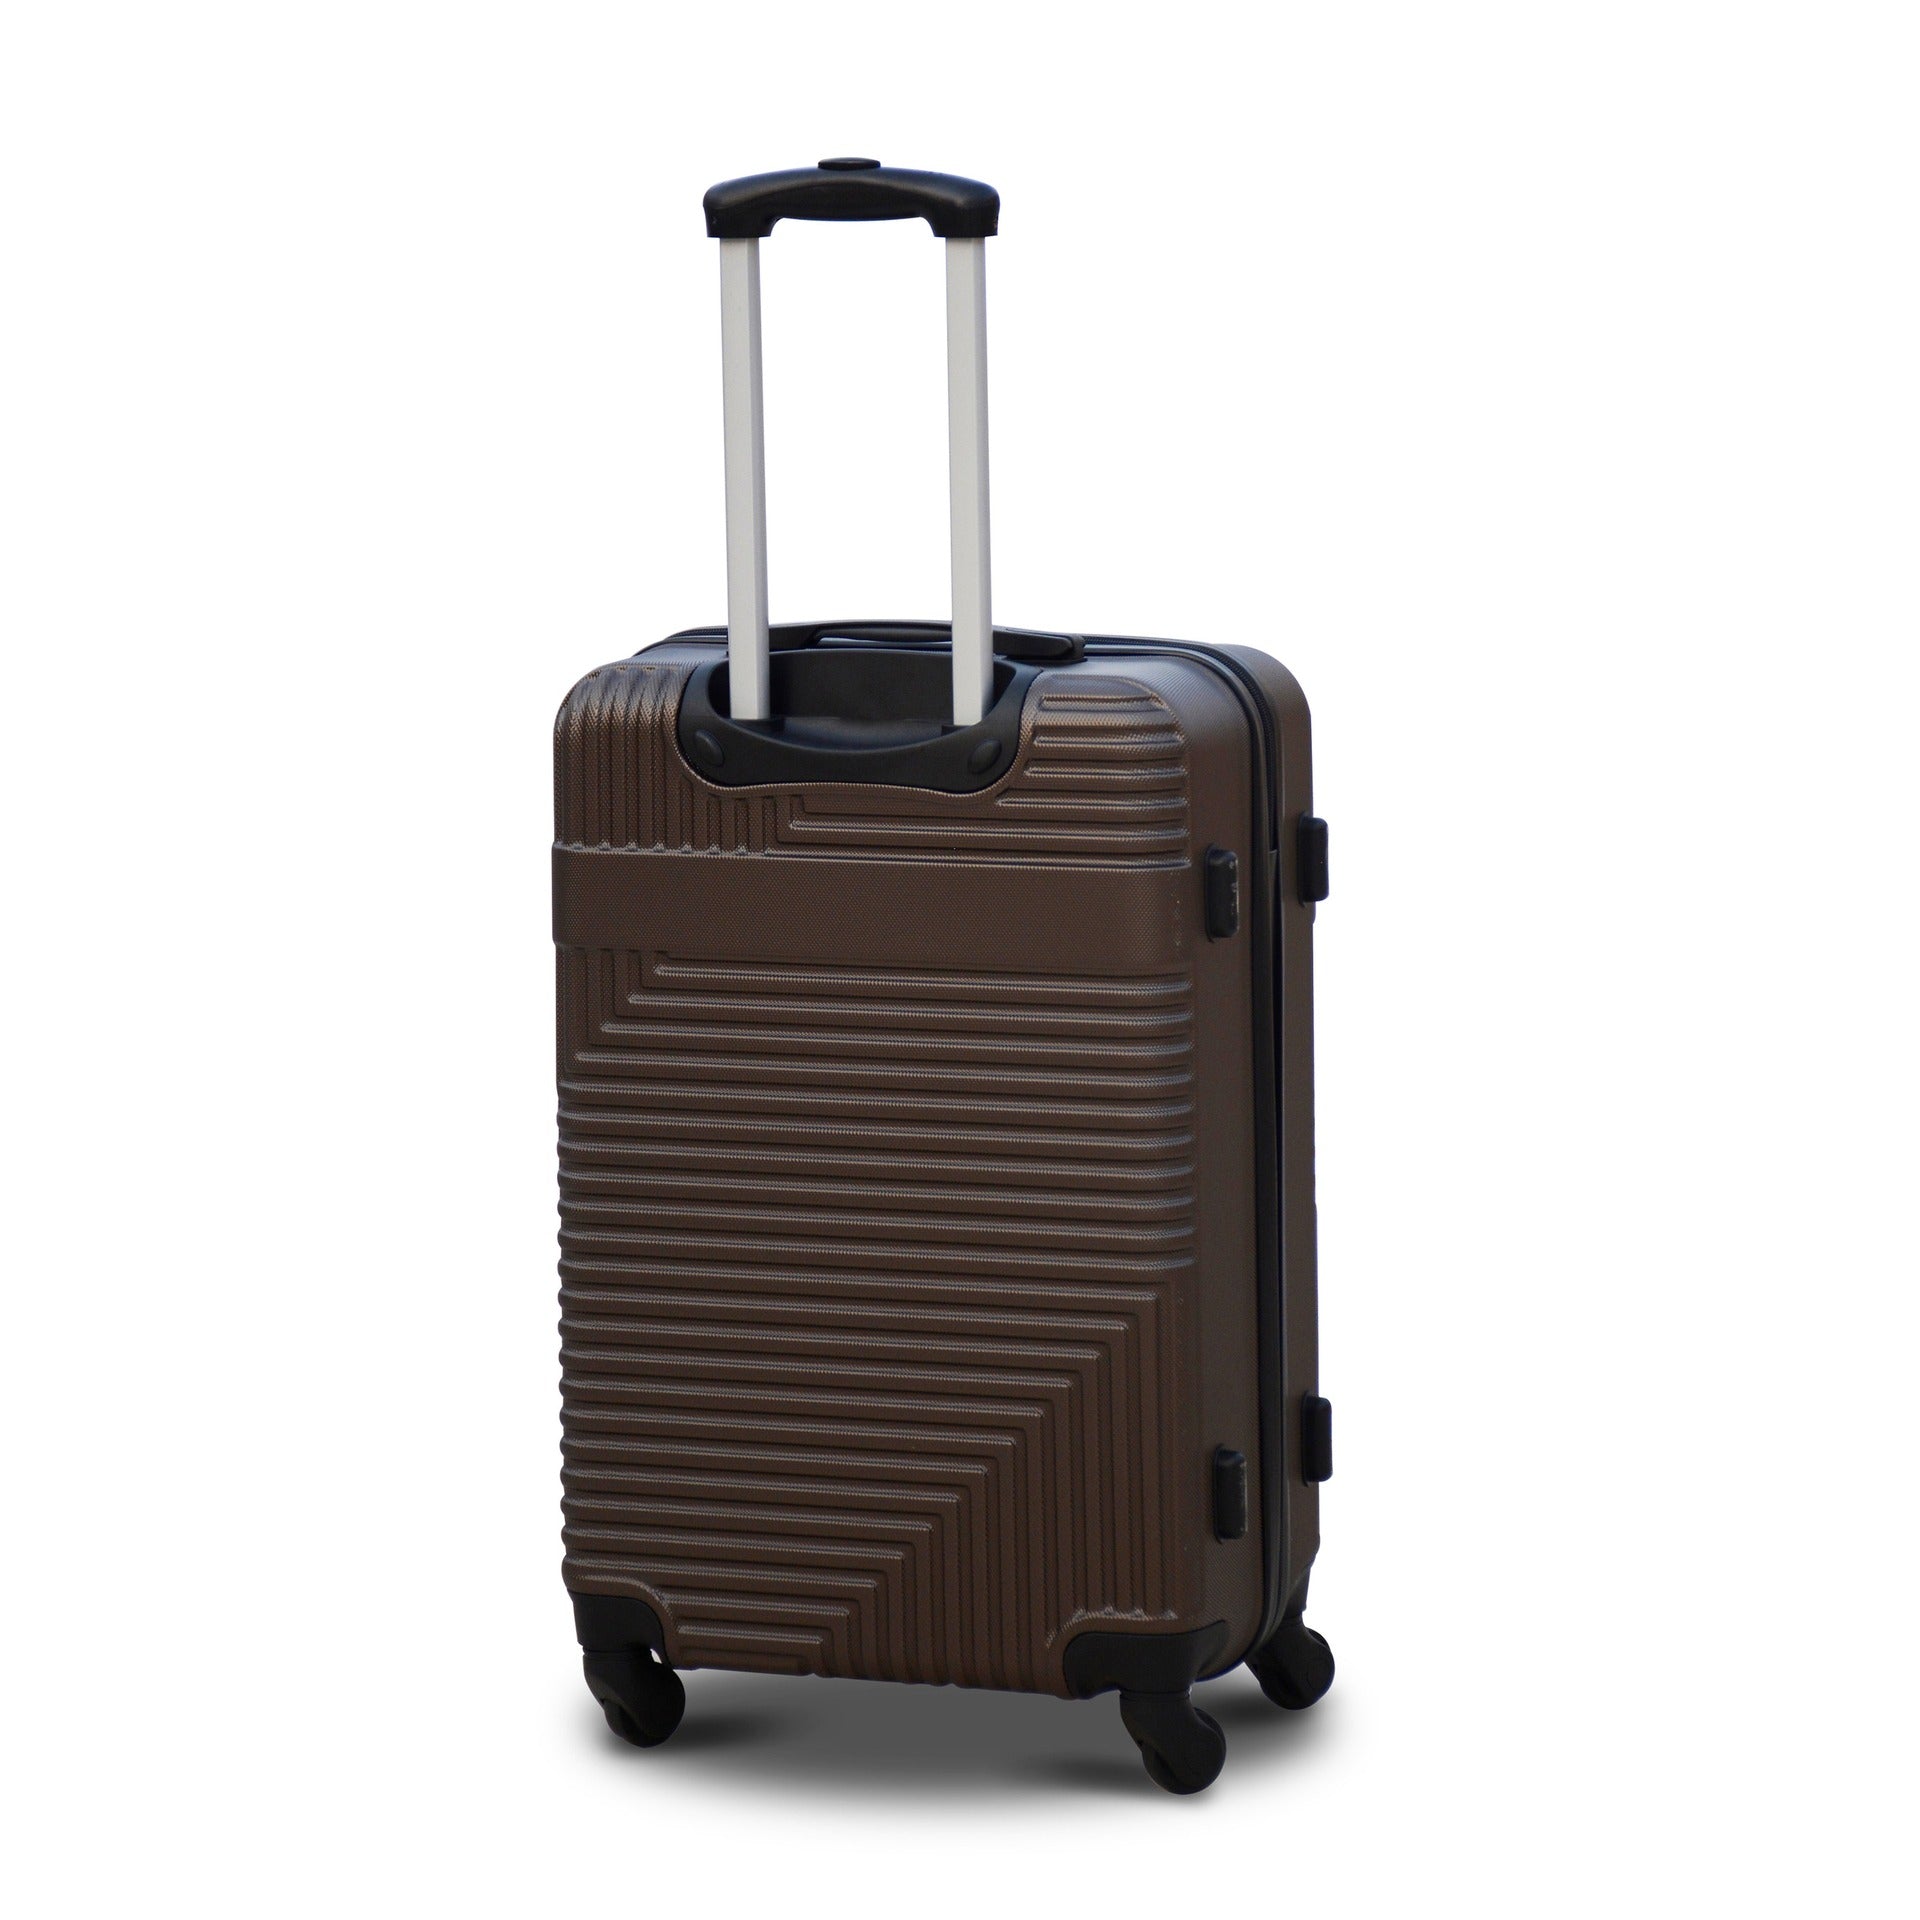 20" Brown Colour Travel Way ABS Luggage Lightweight Hard Case Carry On Spinner Wheel Trolley Bag